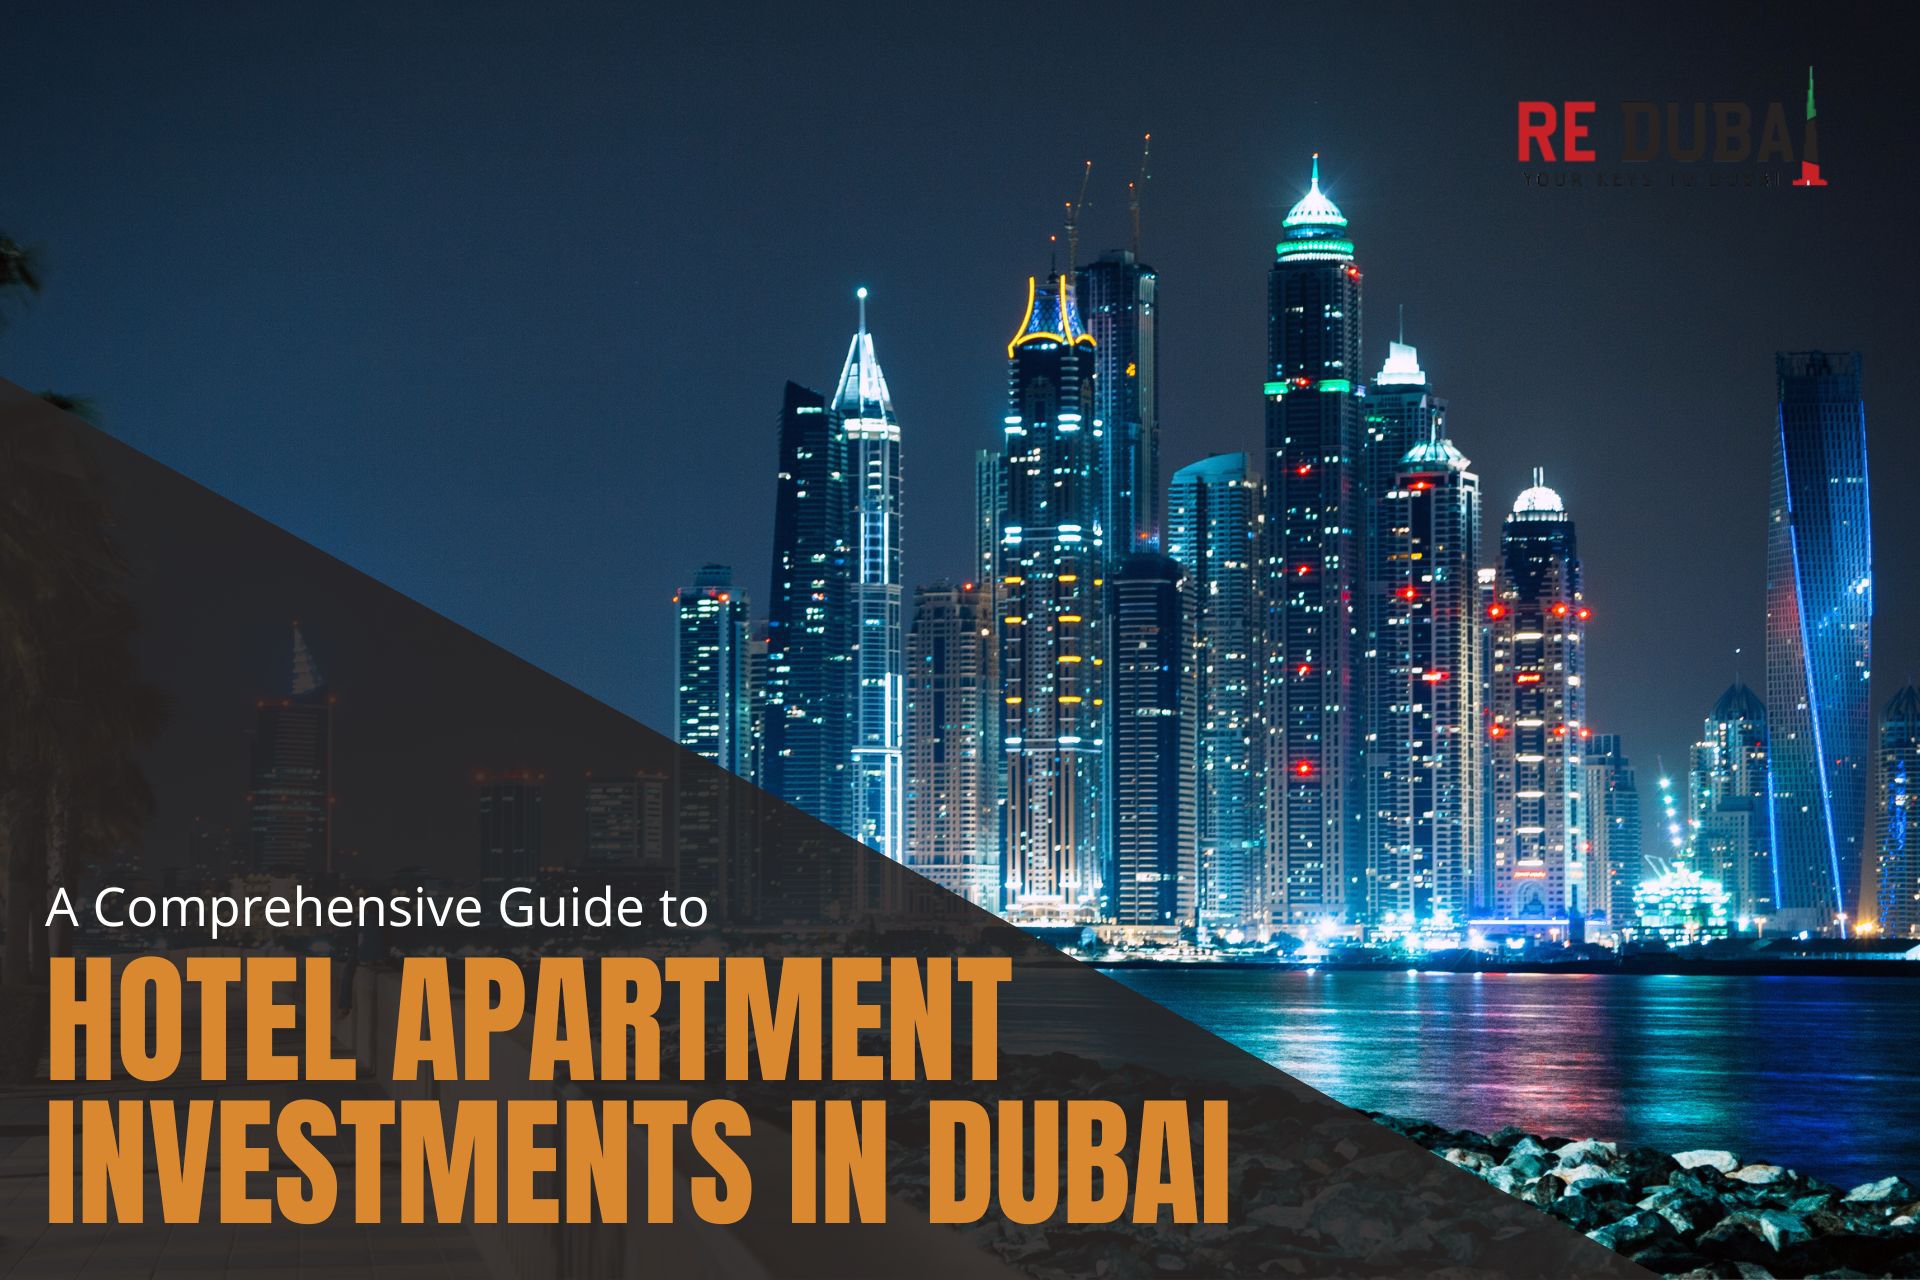 A Comprehensive Guide to Hotel Apartment Investments in Dubai cover